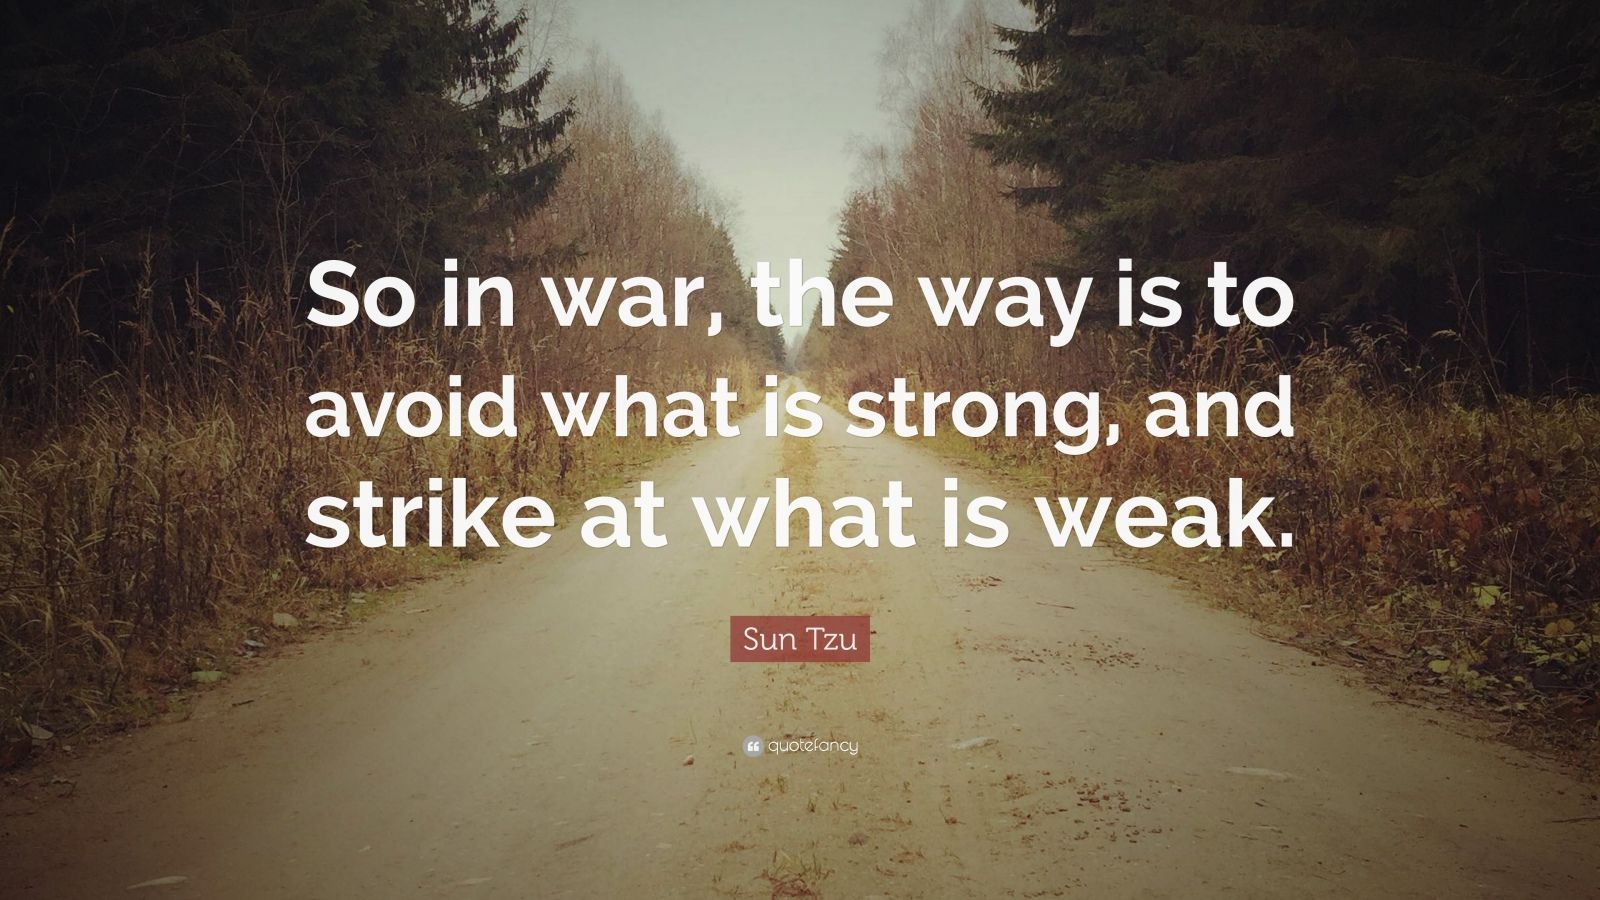 Sun Tzu Quote: “So in war, the way is to avoid what is strong, and